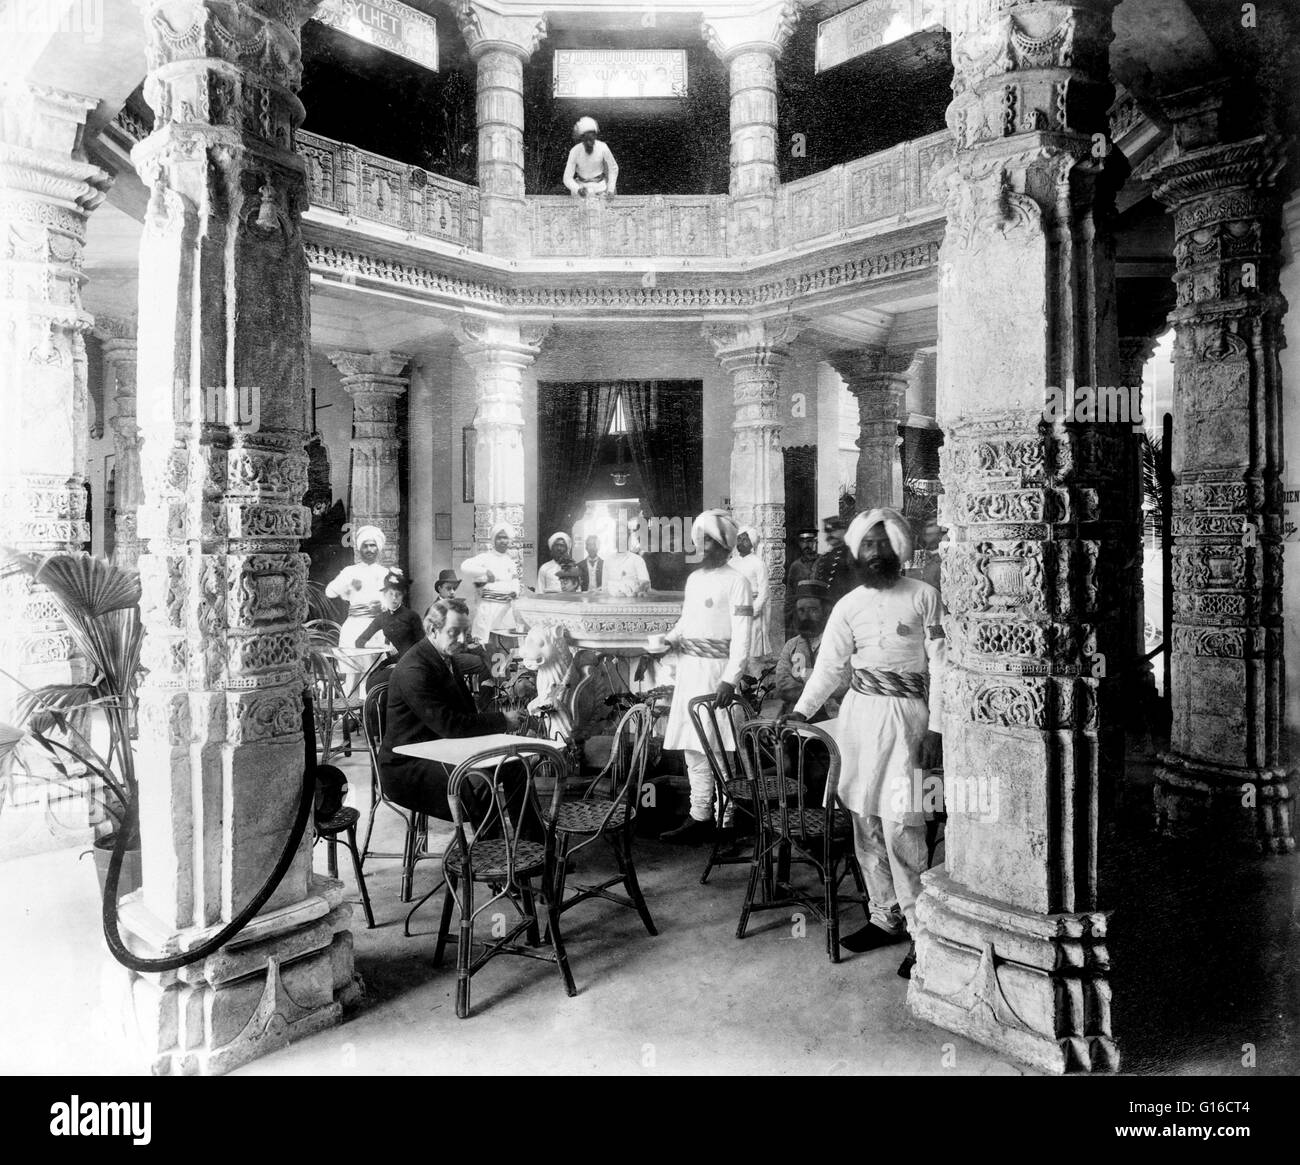 Café in the rotunda of the Pavilion of India, with waiters and patrons, Paris Exposition, 1889. The Exposition Universelle of 1889 was a World's Fair held in Paris, France from May 6 to October 31, 1889. It was held during the year of the 100th anniversar Stock Photo